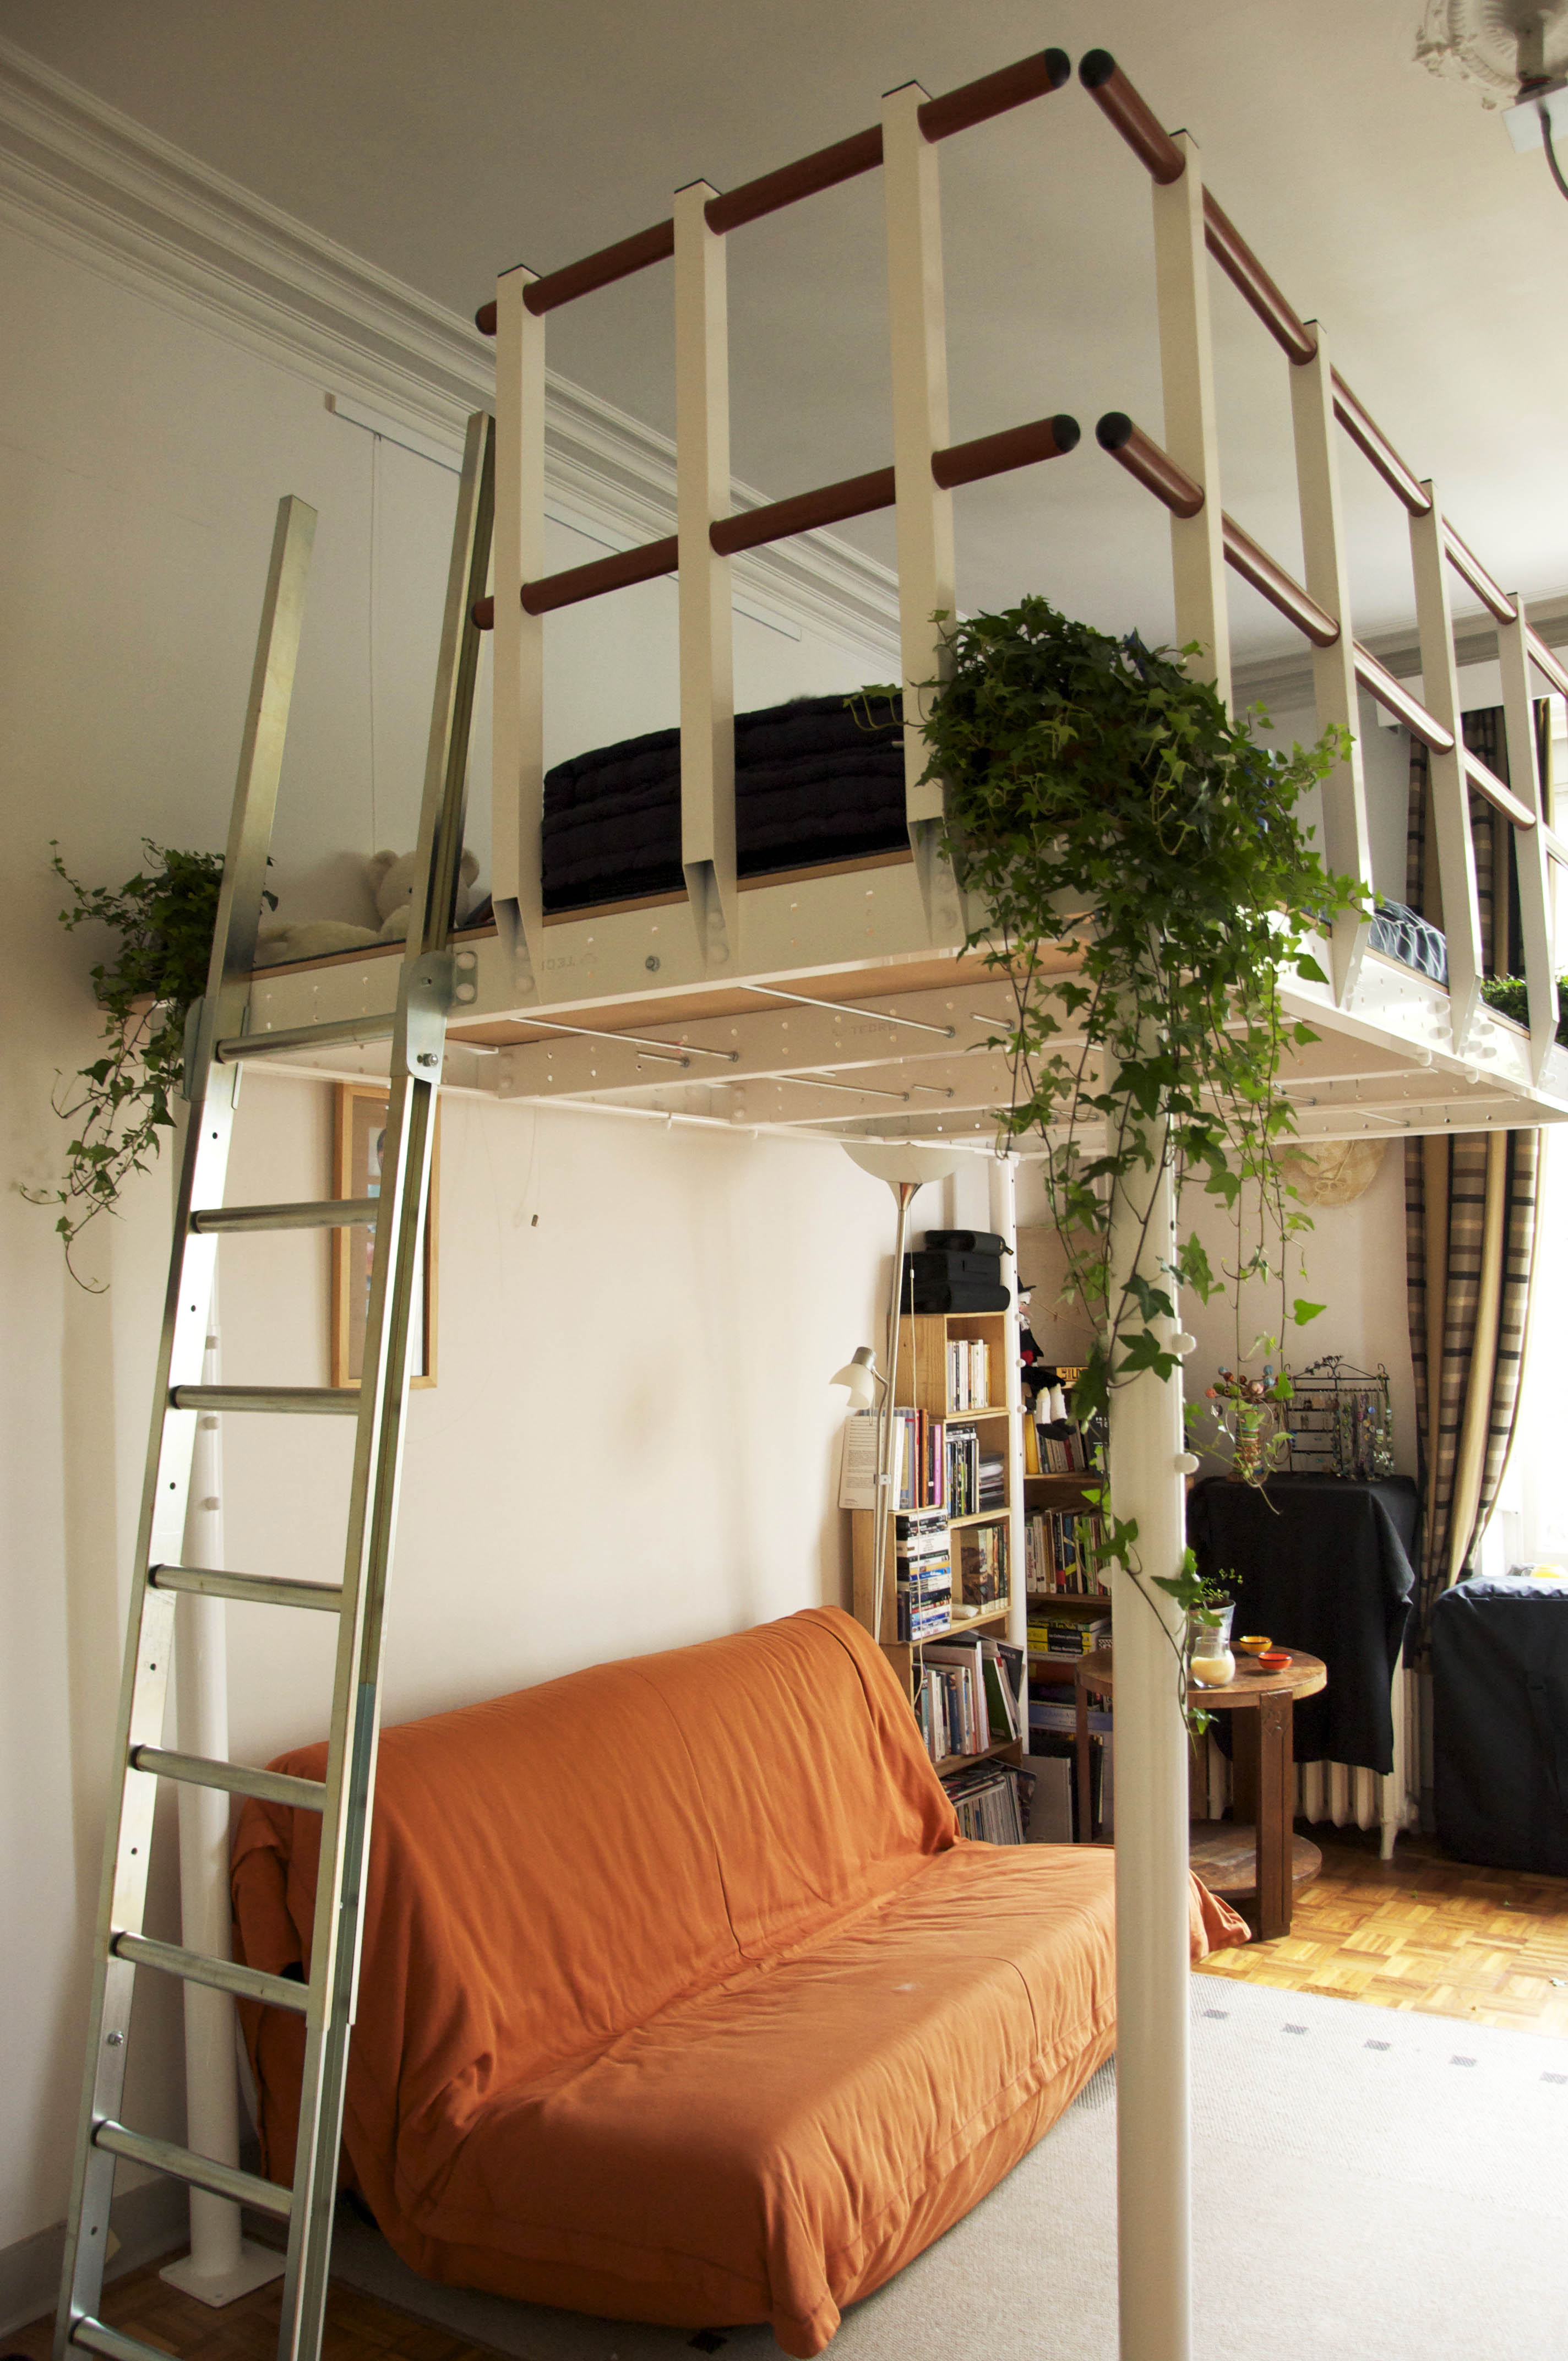 Diy Loft Bed T8 Kit In Vancouver, Bunk Beds Vancouver